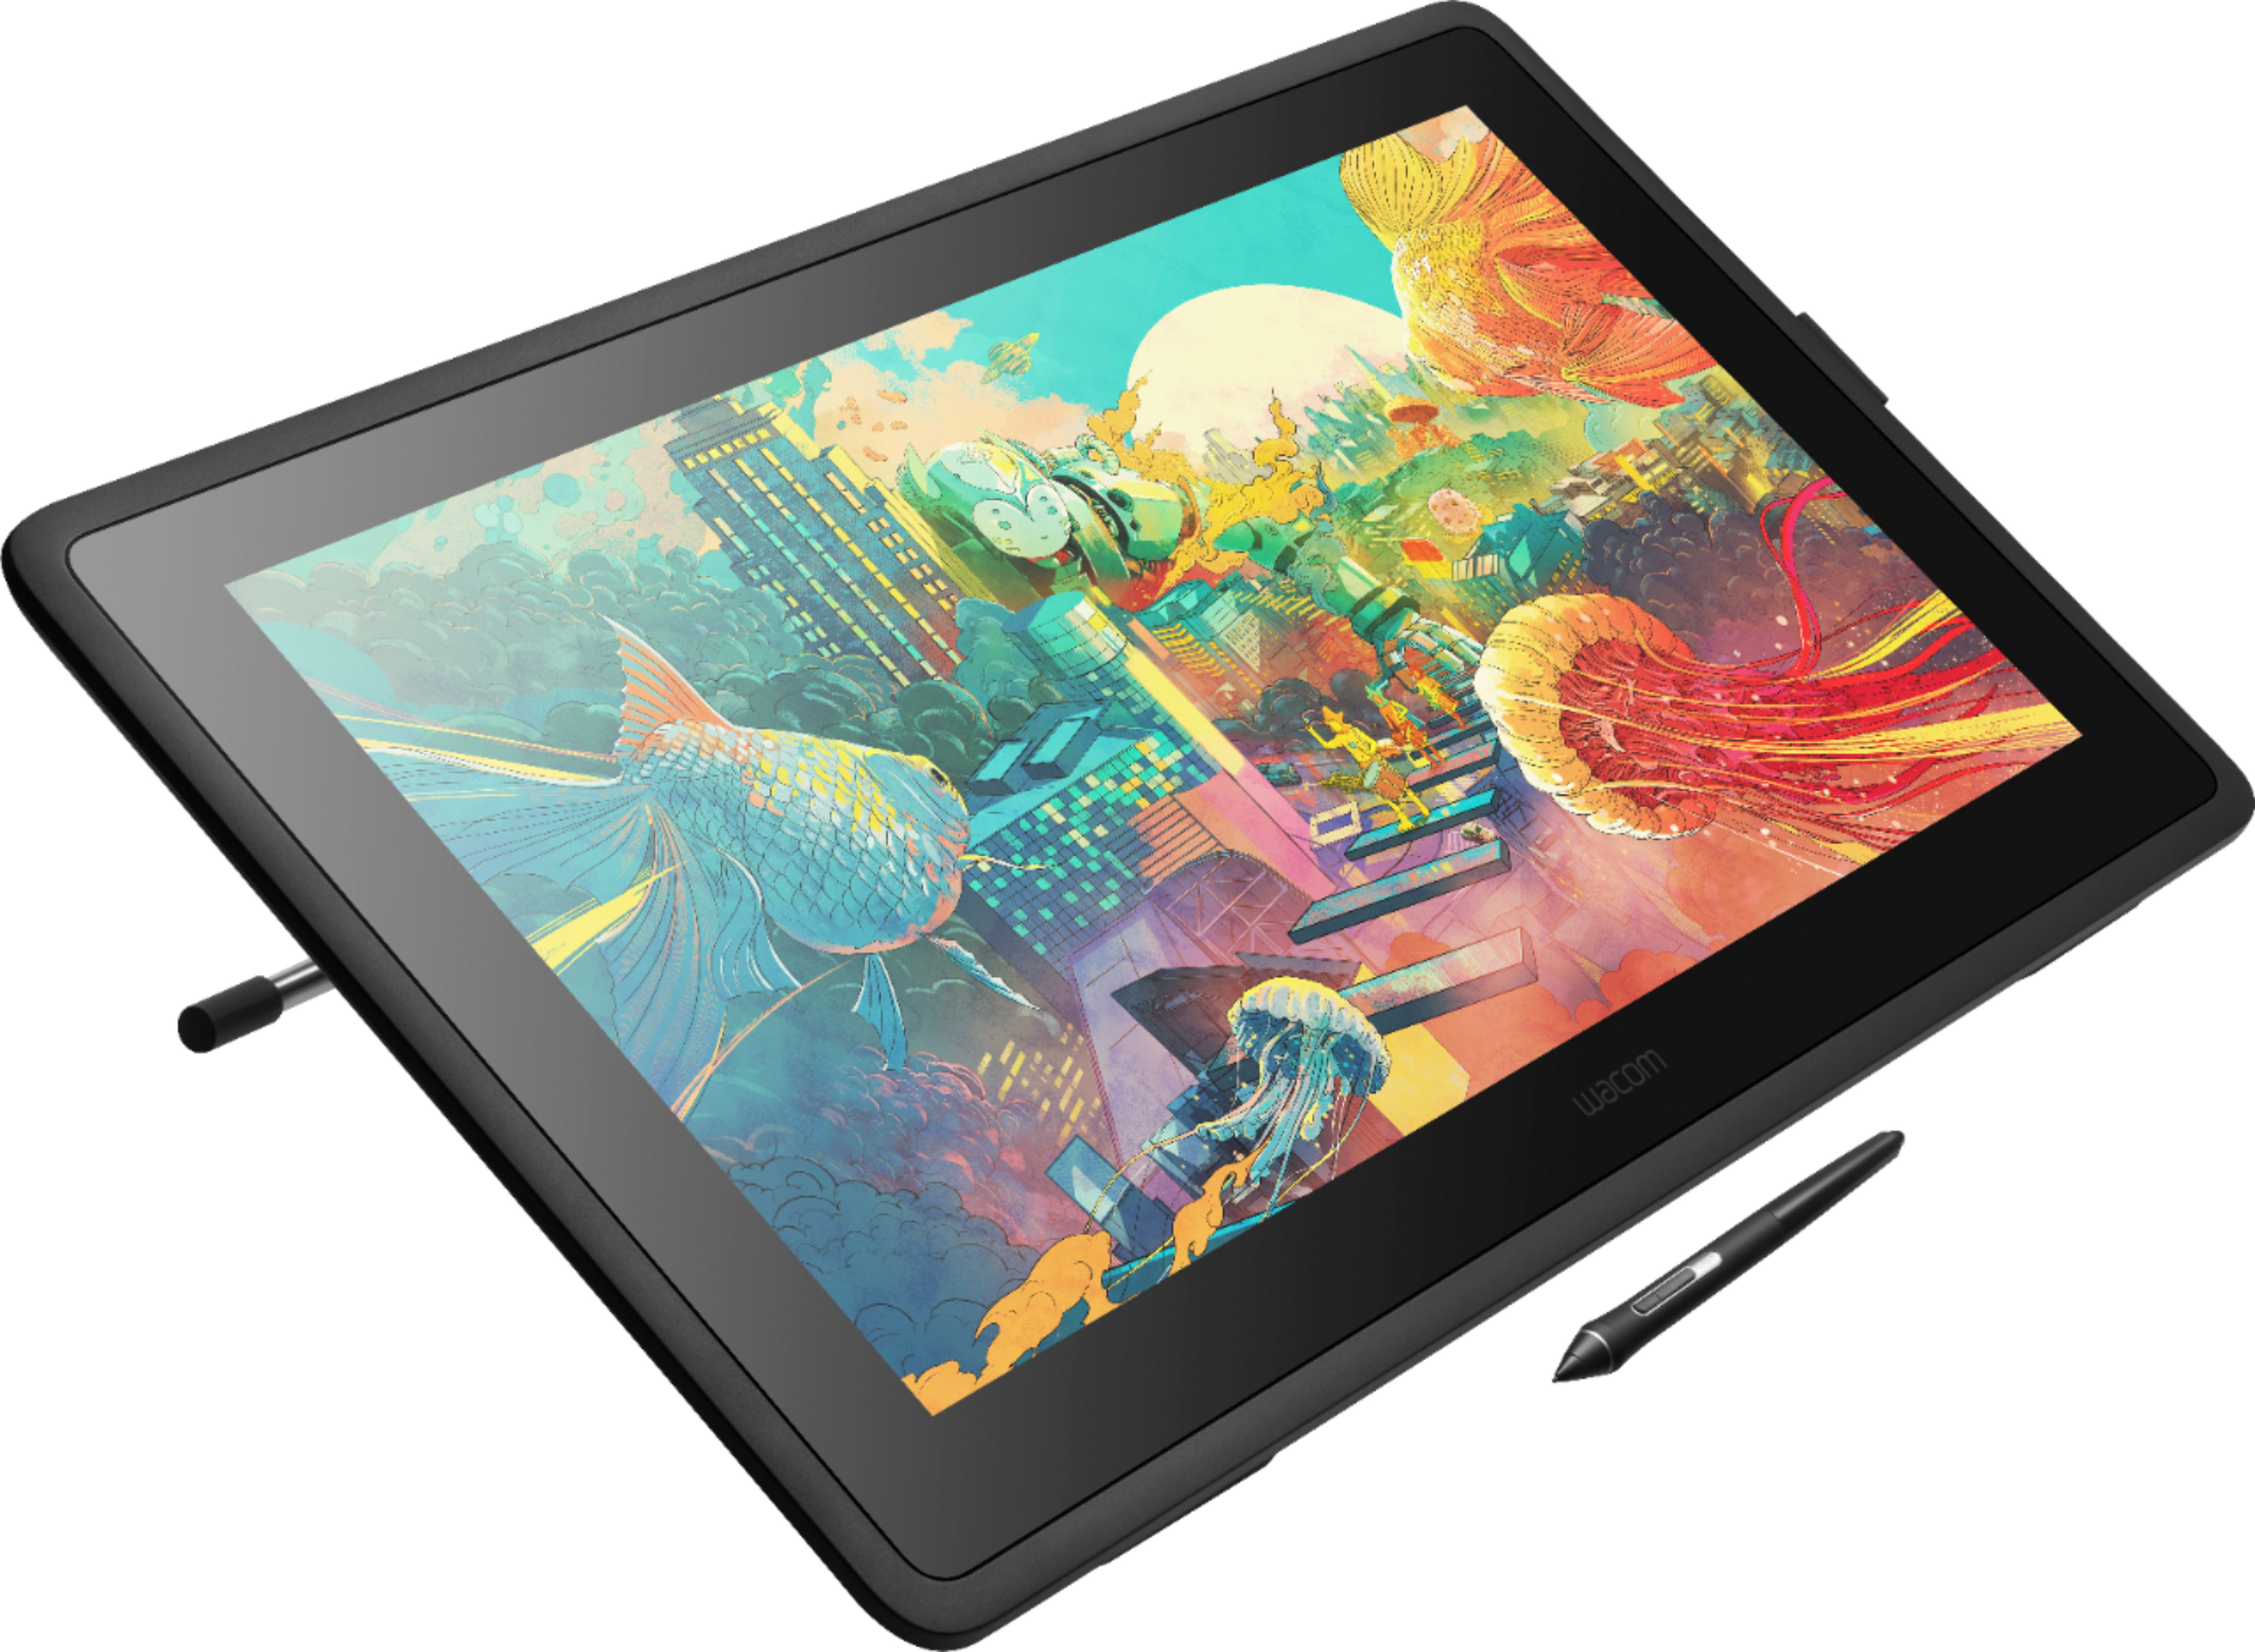 Angle View: iskn - Repaper - Drawing Tablet - 4MB Storage Capacity - Black Matte